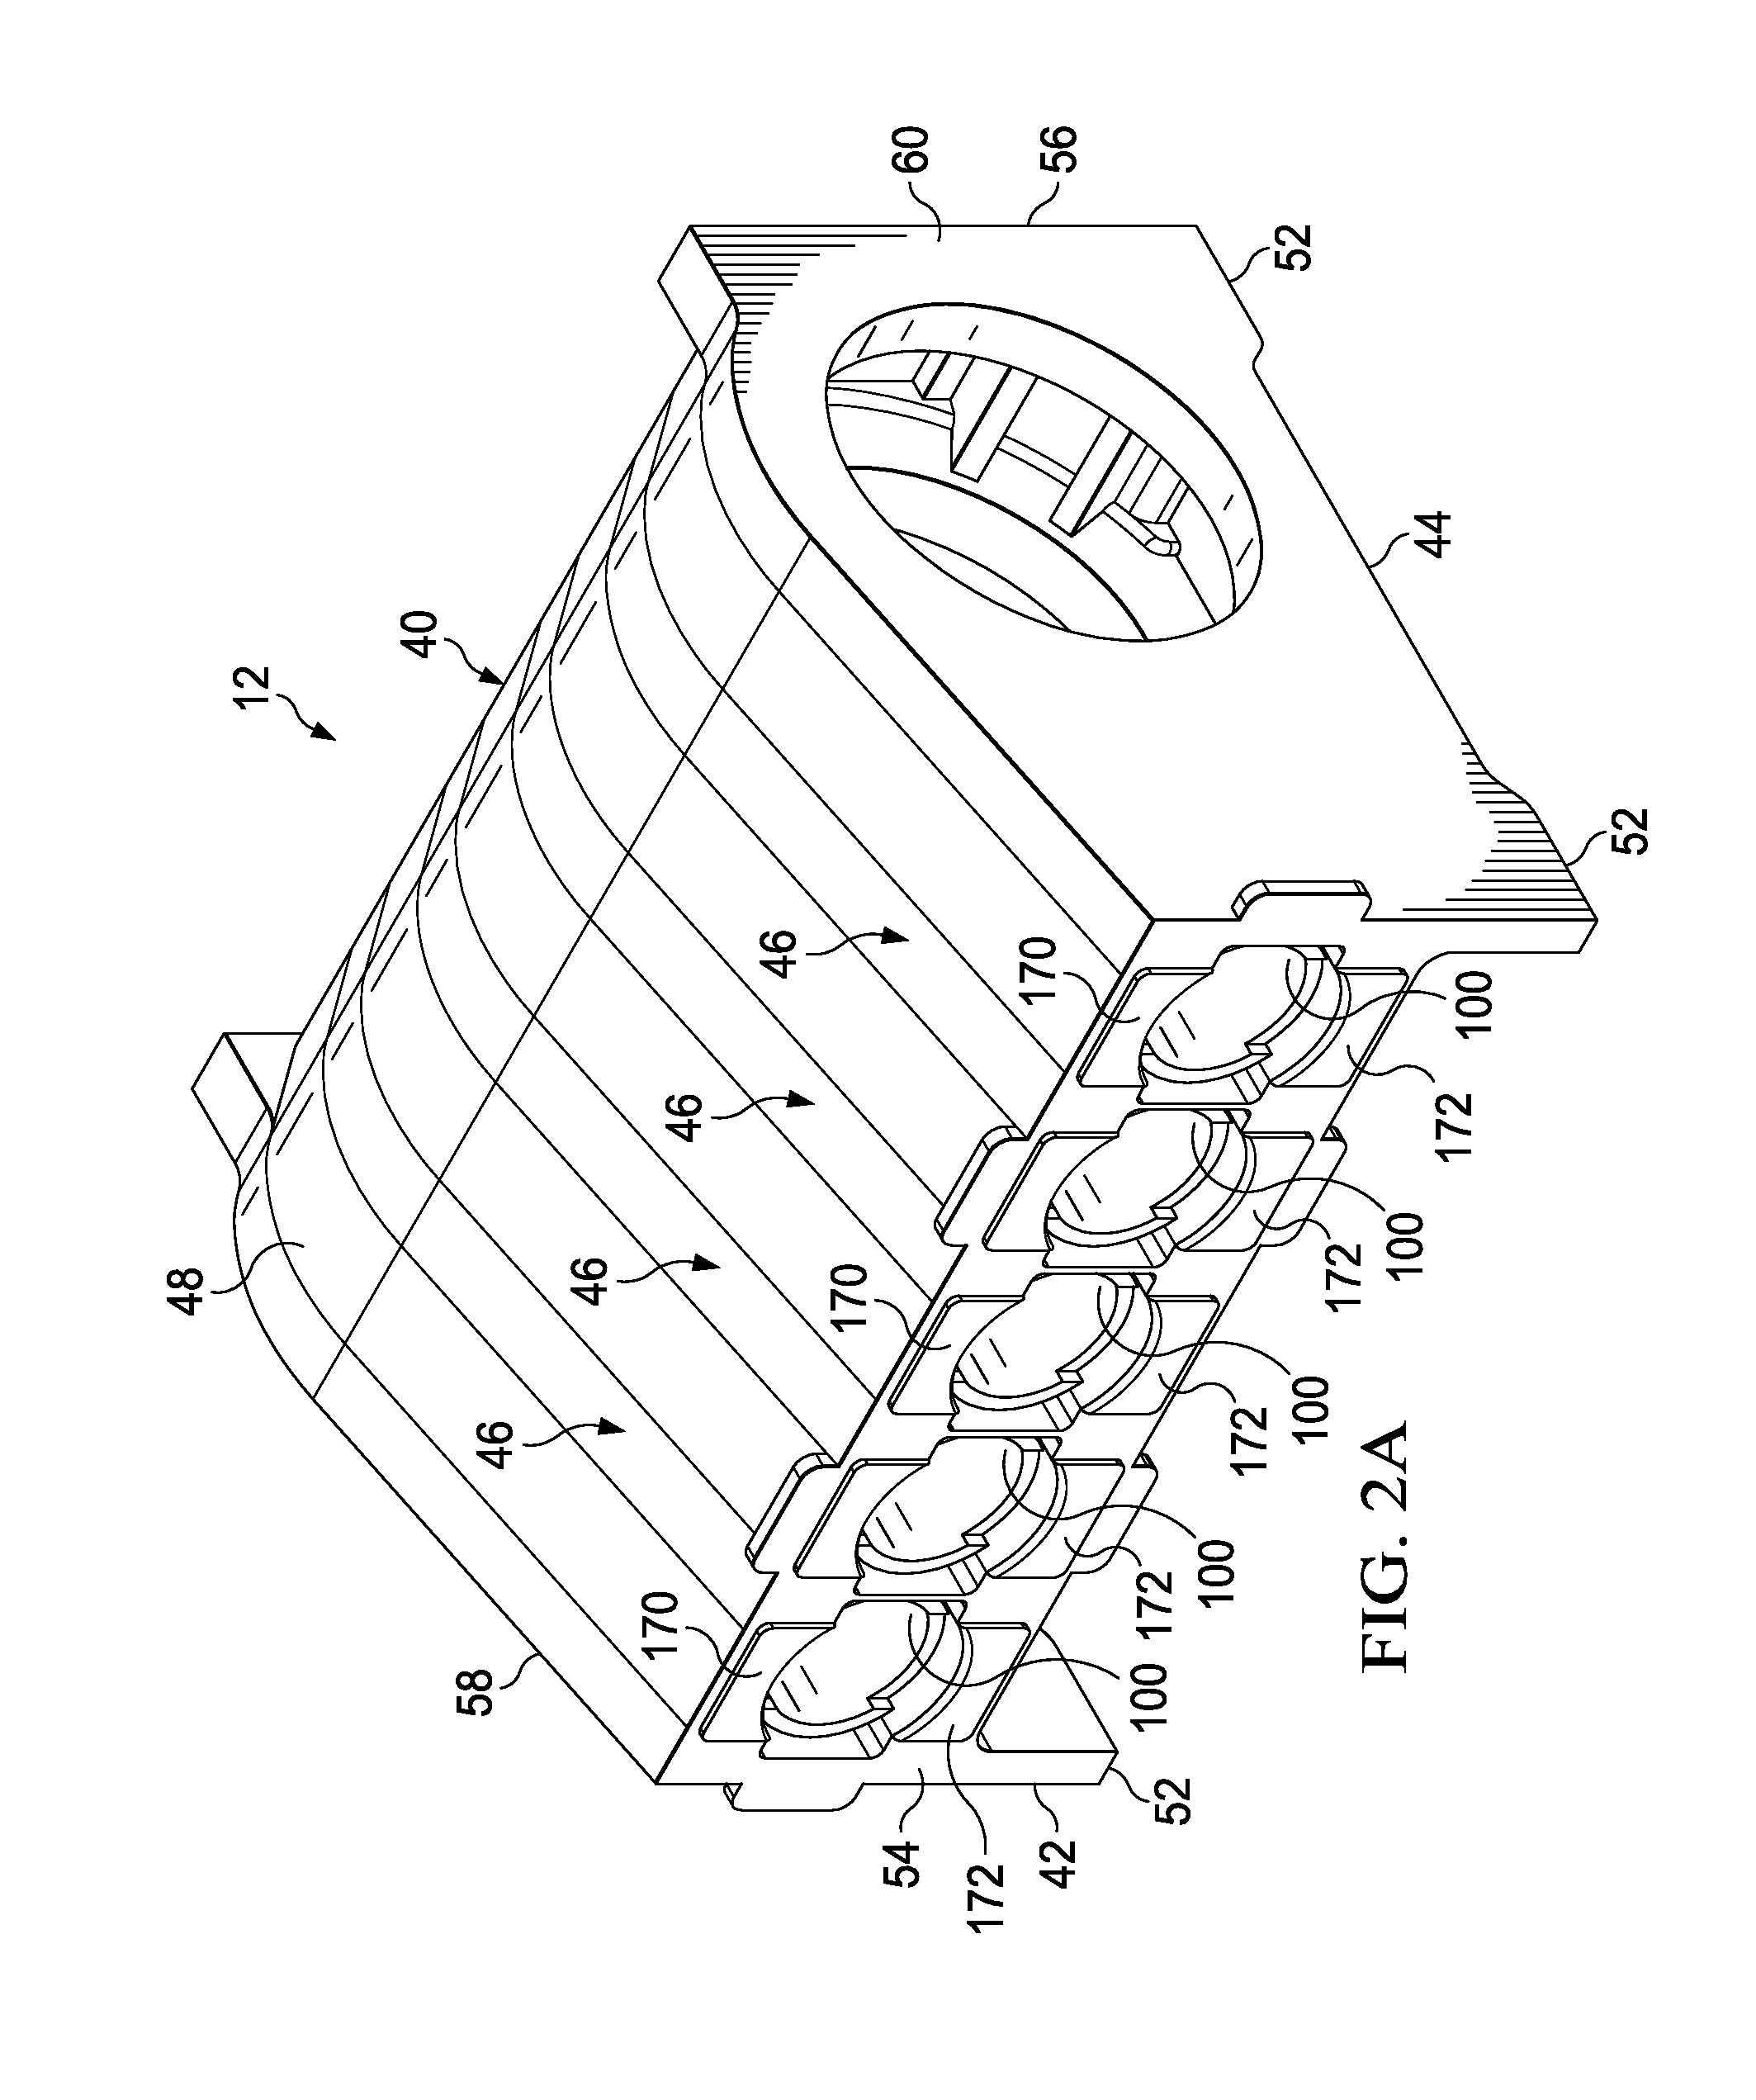 Bearing system for reciprocating pump and method of assembly